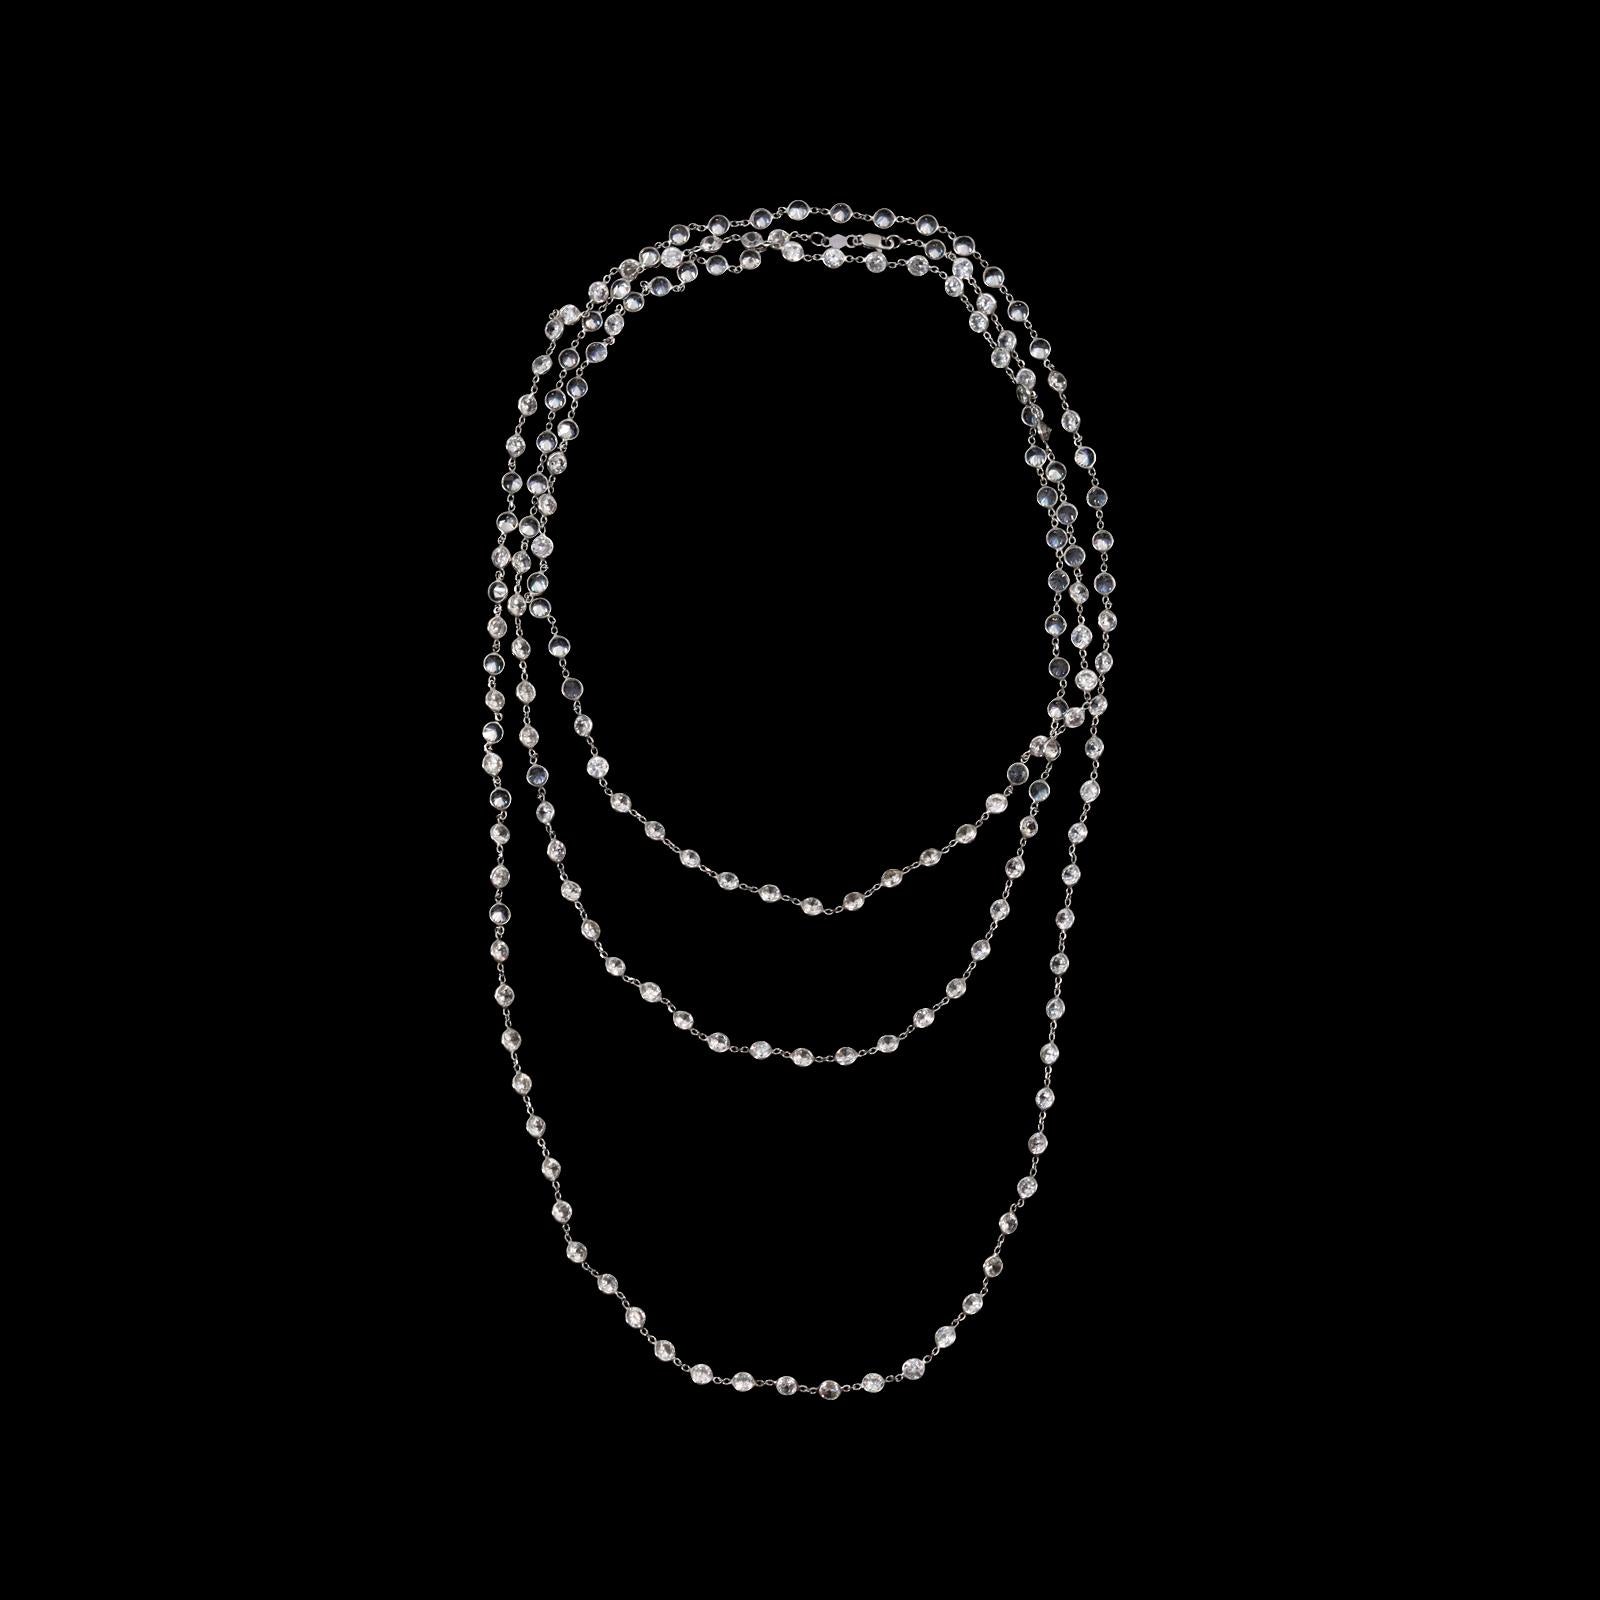 Vintage Zircon By the Yard Silver Tone Necklace Circa 2004.  This magnificent piece looks just like diamond by the yard except is zircon by the yard.  It is shiny and long and magnificent.  At 60